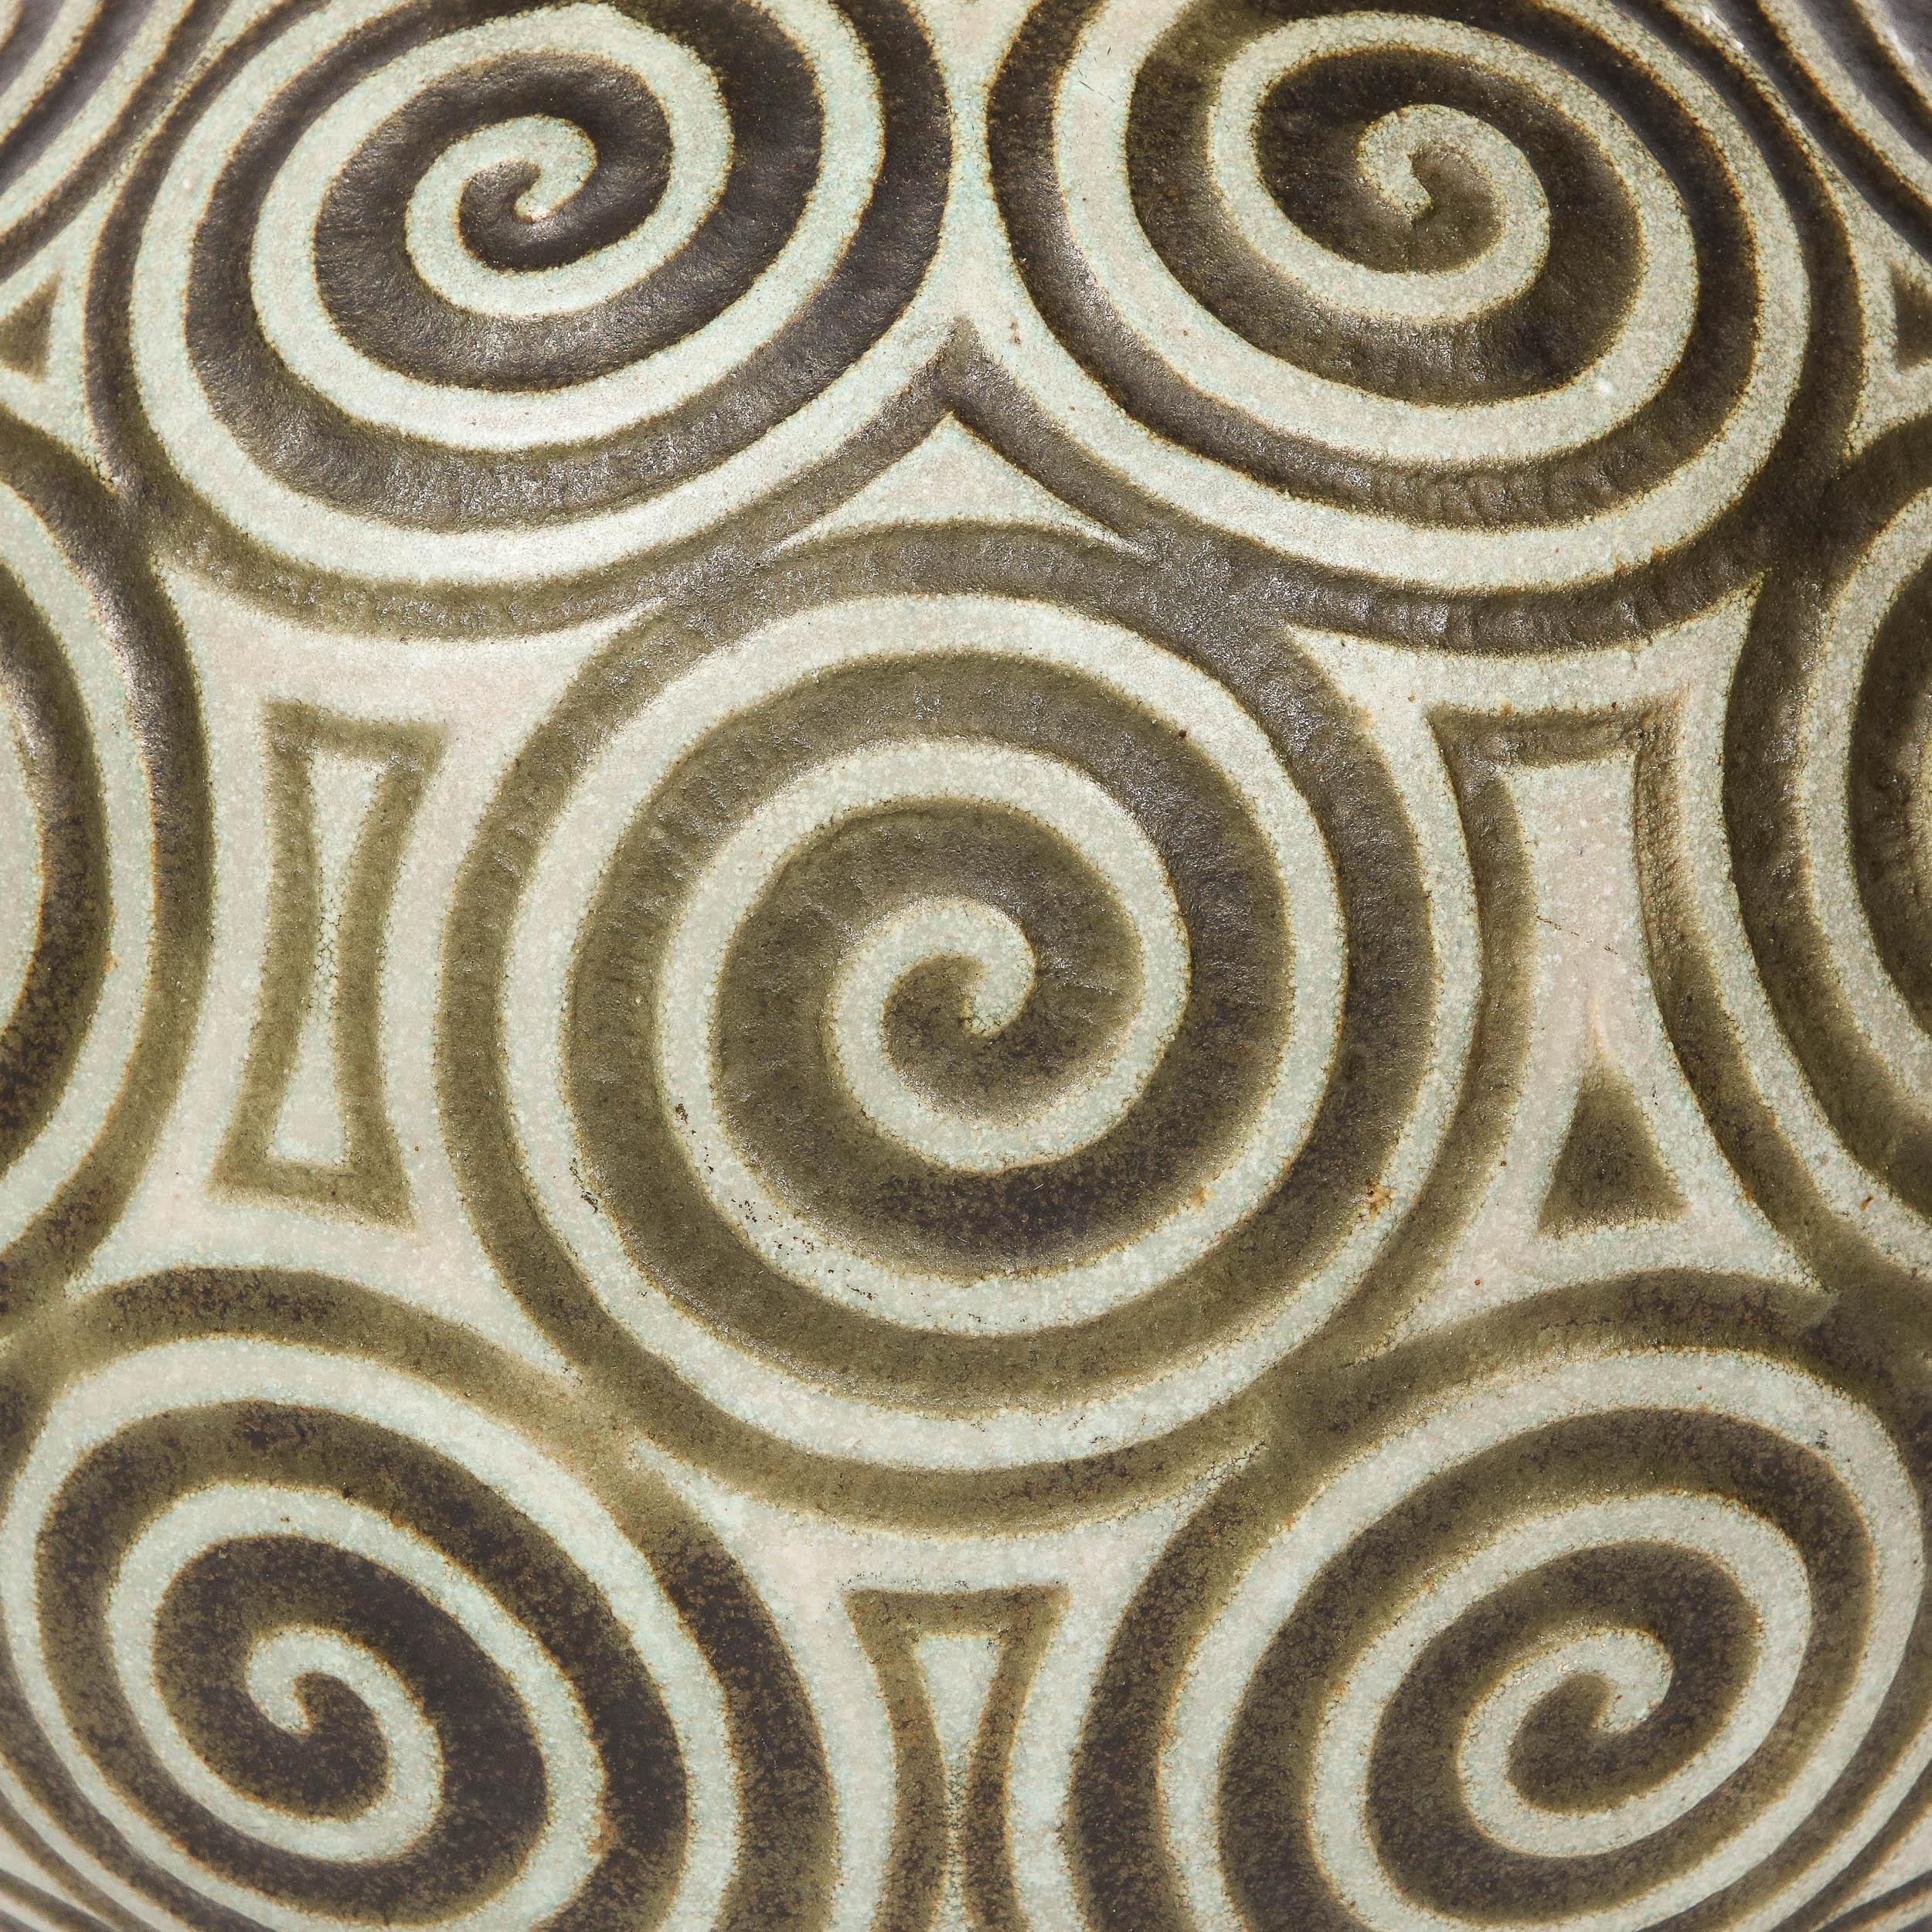 French Art Deco Ceramic Vase with Geometric Spirals in Relief By Joseph Mougin Nancy